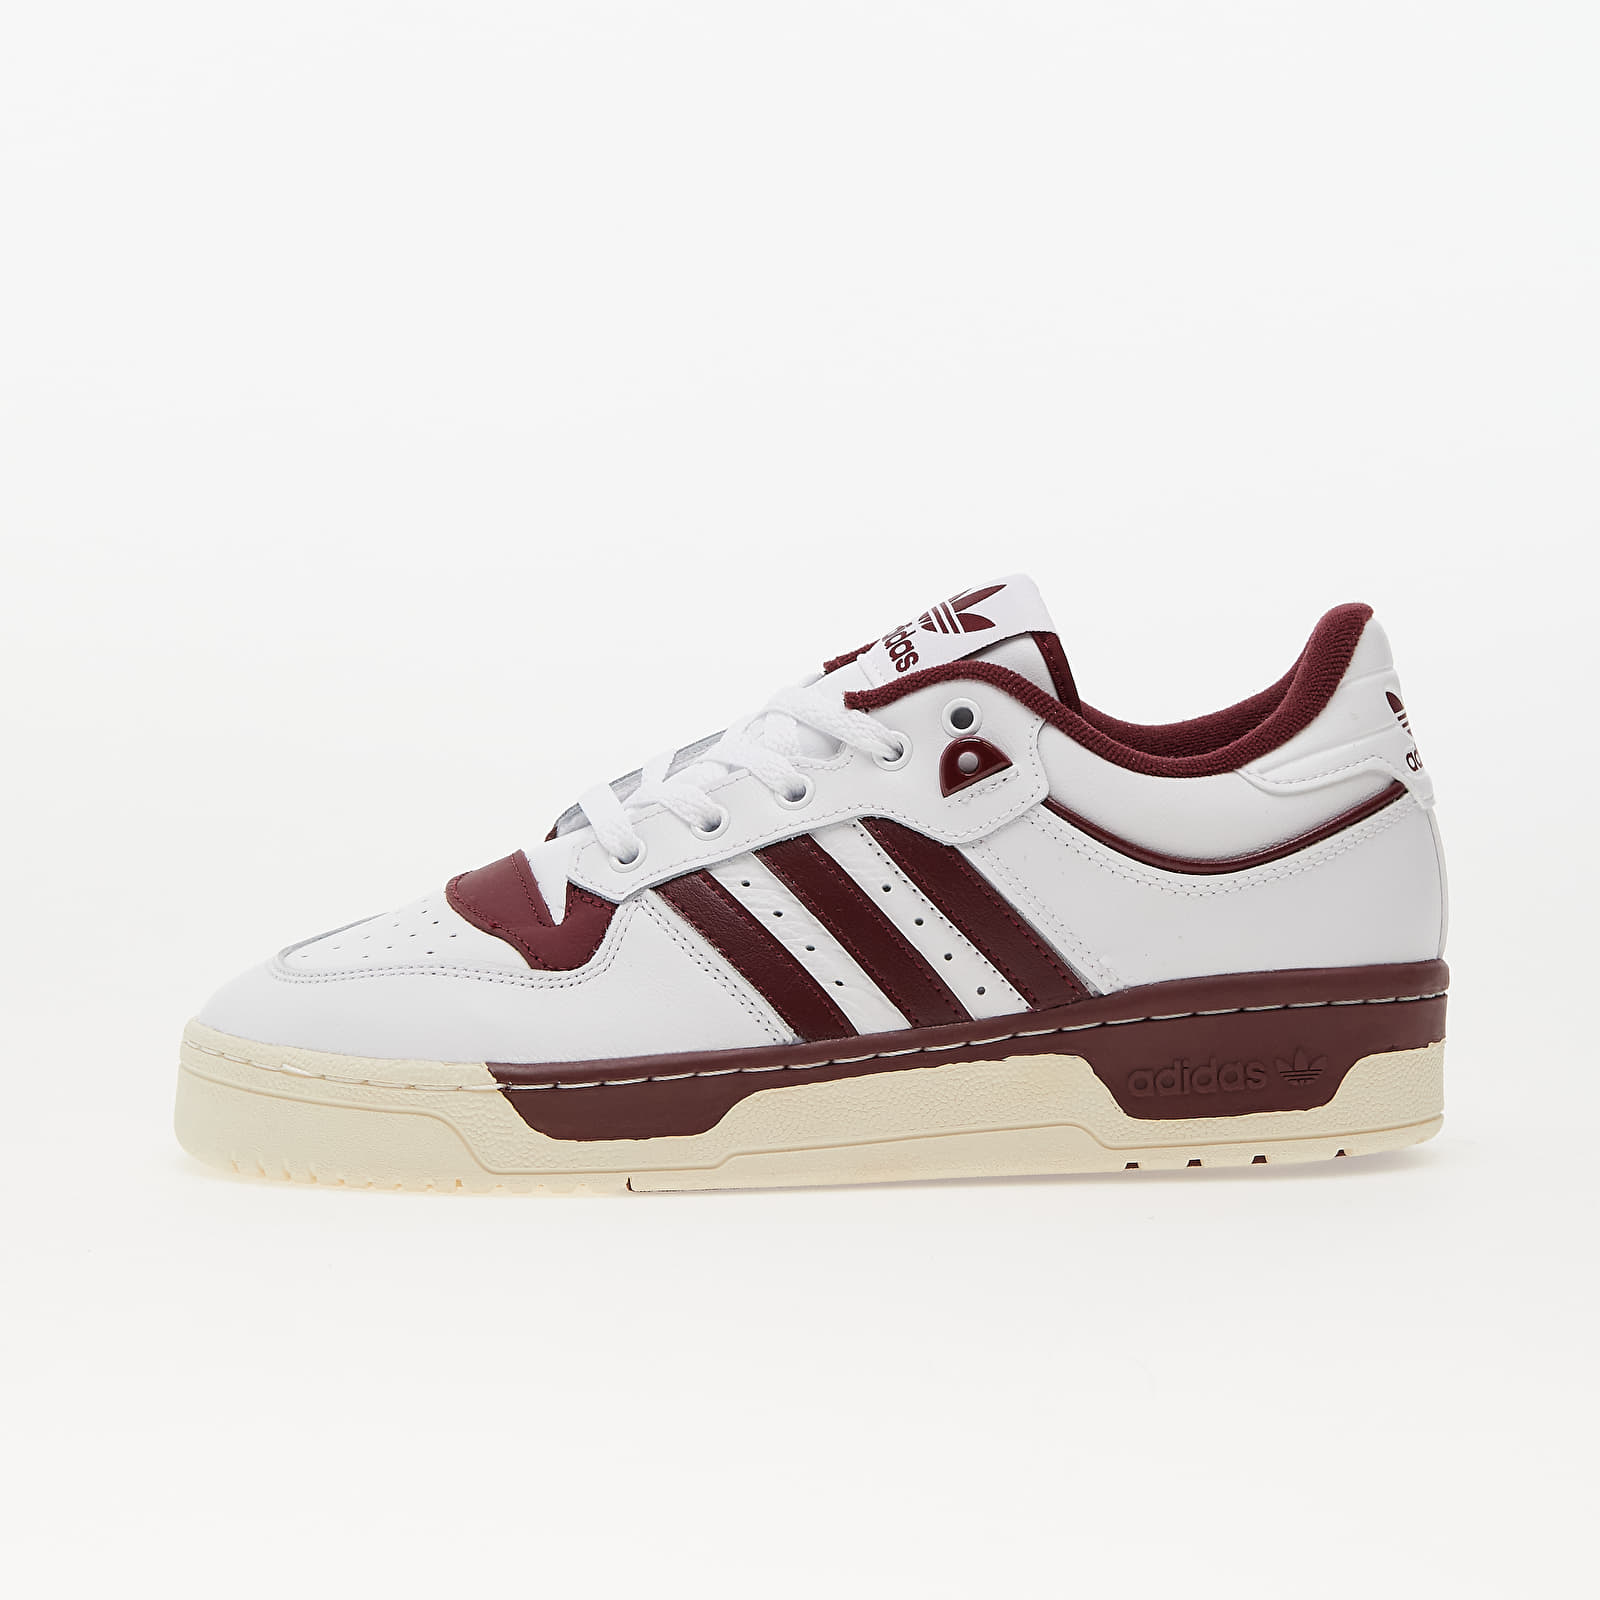 Chaussures et baskets femme adidas Rivalry Low 86 W Ftw White/ Shadow Red/ Core White